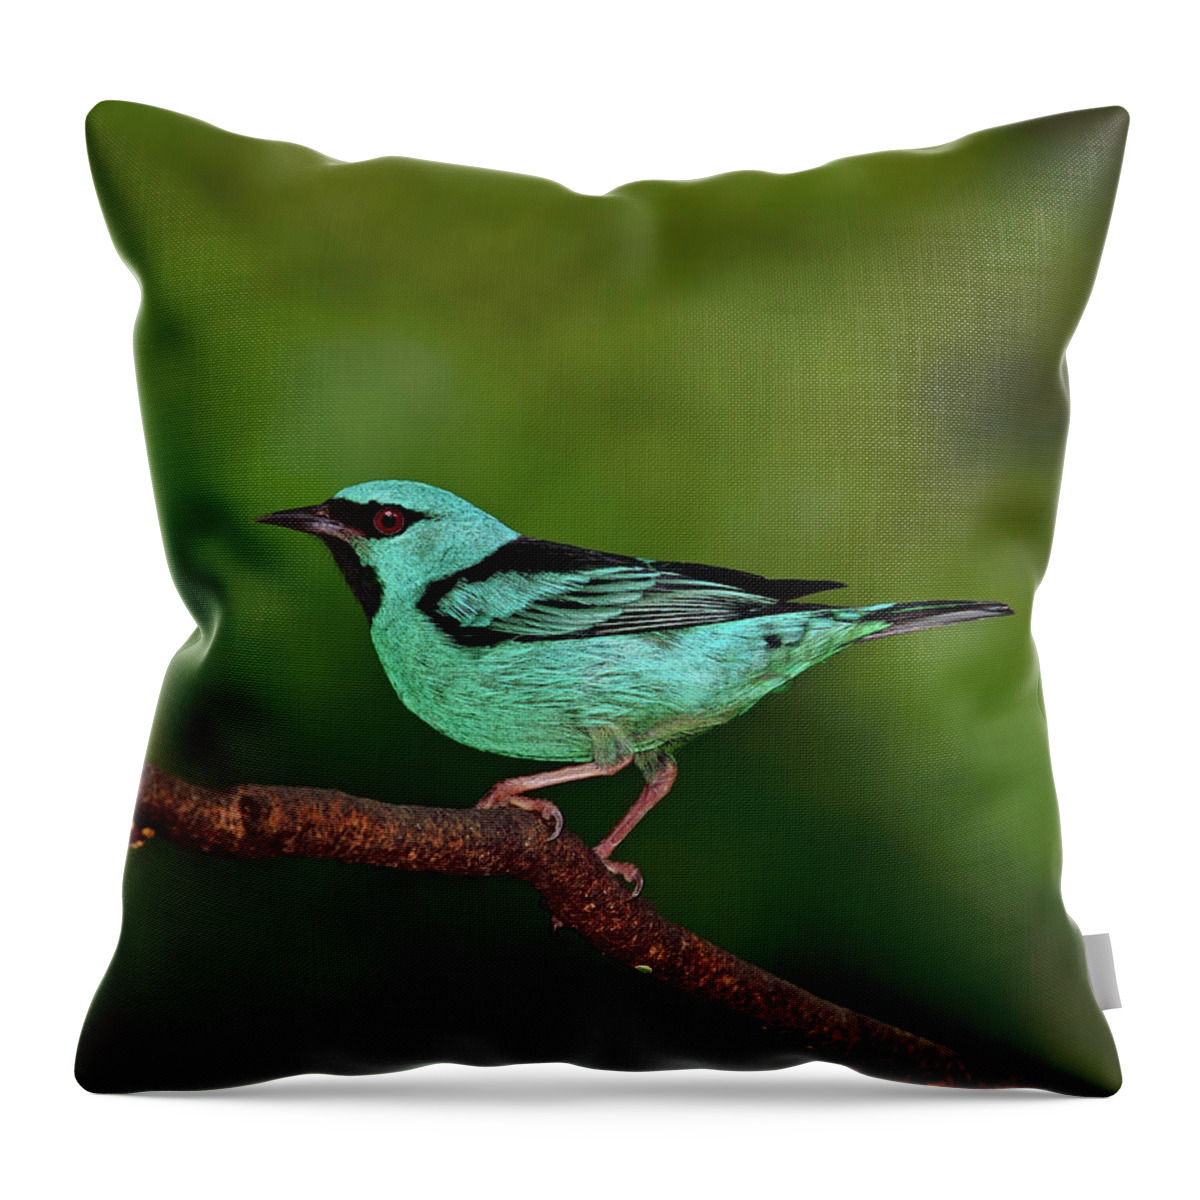 Blue Dacnis Throw Pillow featuring the photograph Highlight by Tony Beck